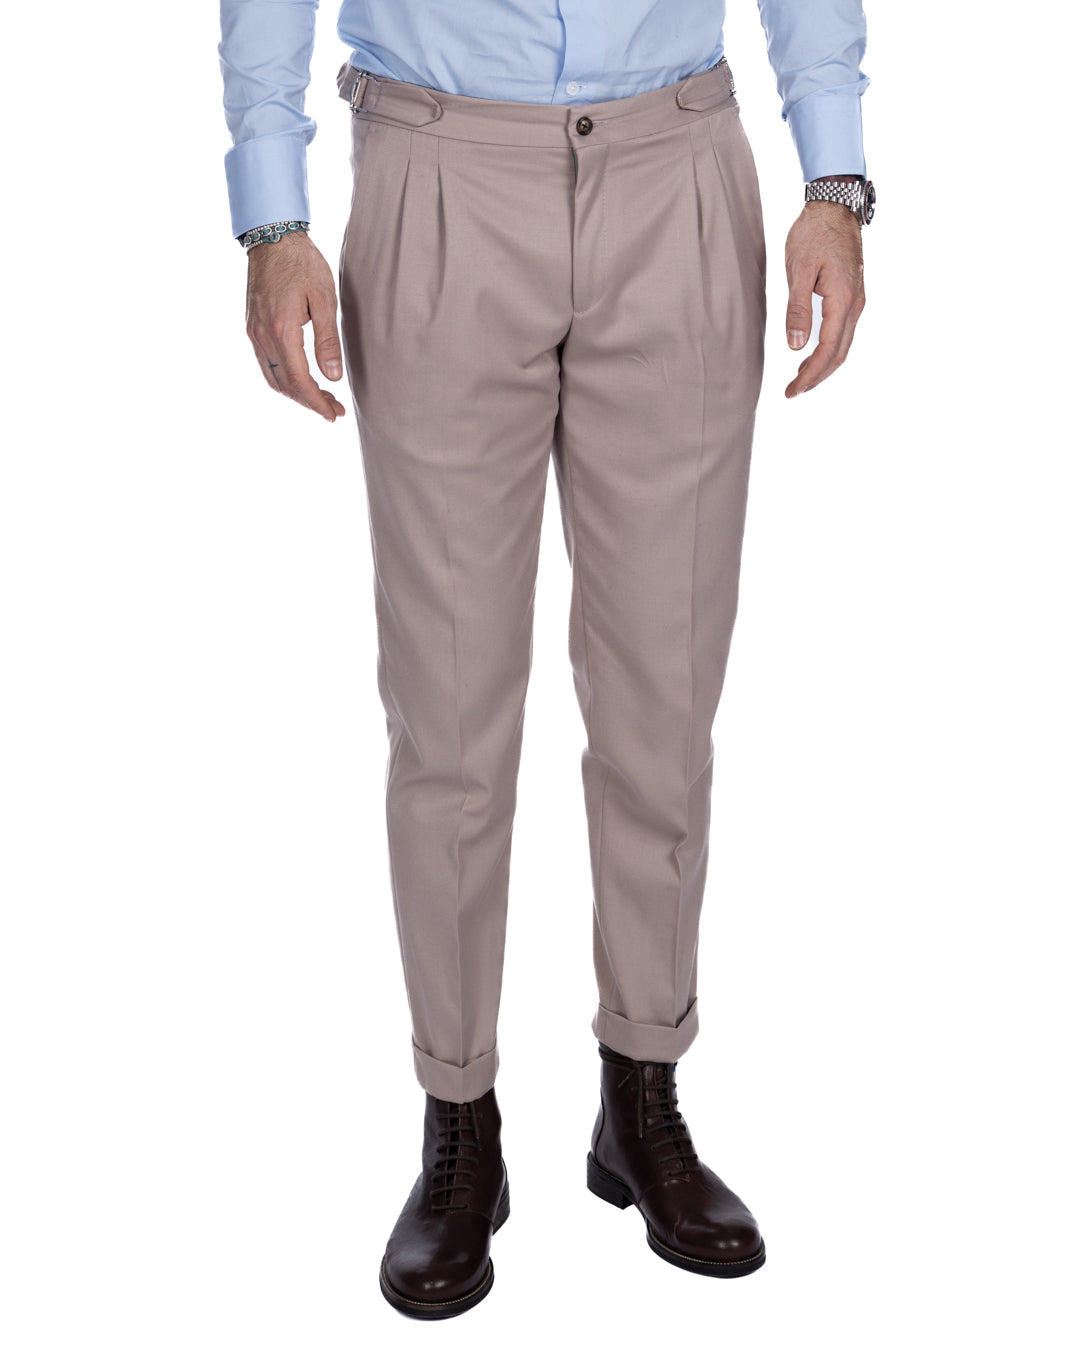 Otranto - beige trousers with buckles and pleats